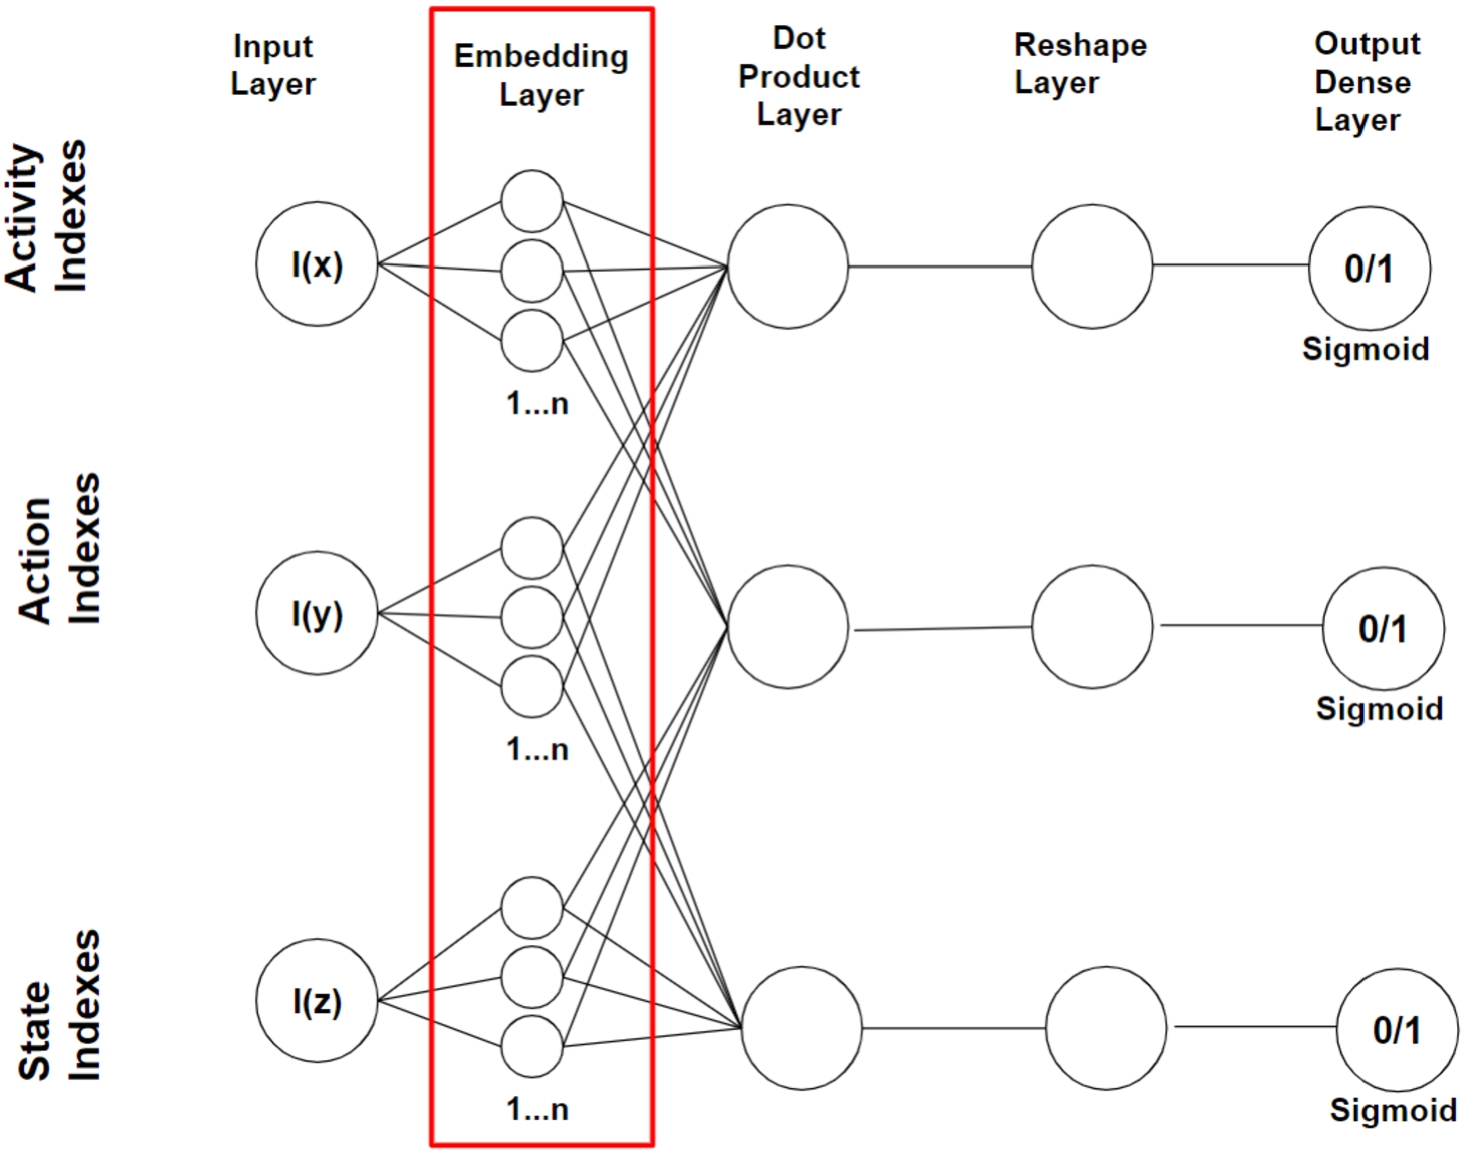 Arrangement of the deep neural network for training entity embedding vectors (see layers in red box).